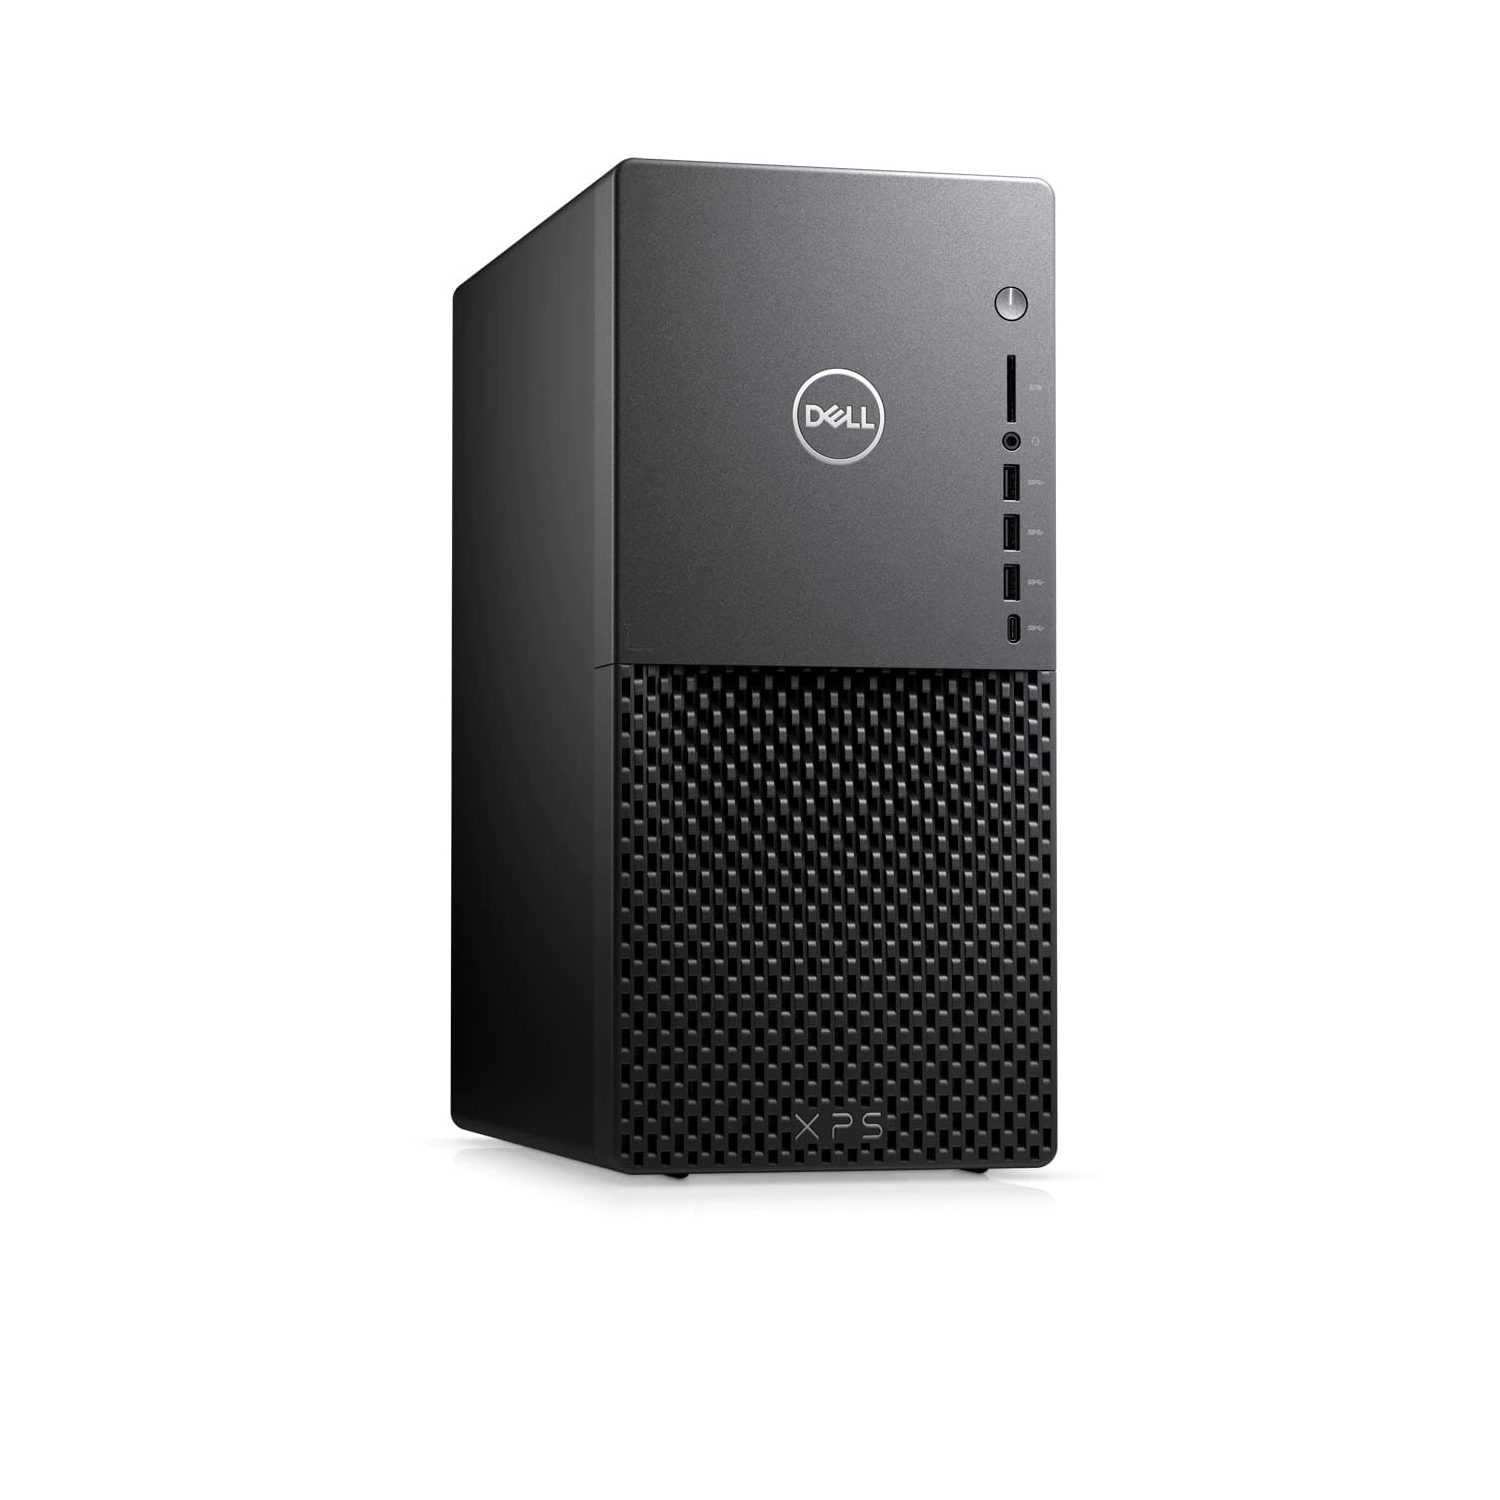 Refurbished (Excellent) - Dell XPS 8940 Desktop (2020) | Core i5 - 512GB SSD - 8GB RAM - GTX 1660 | 6 Cores @ 4.4 GHz - 11th Gen CPU Certified Refurbished